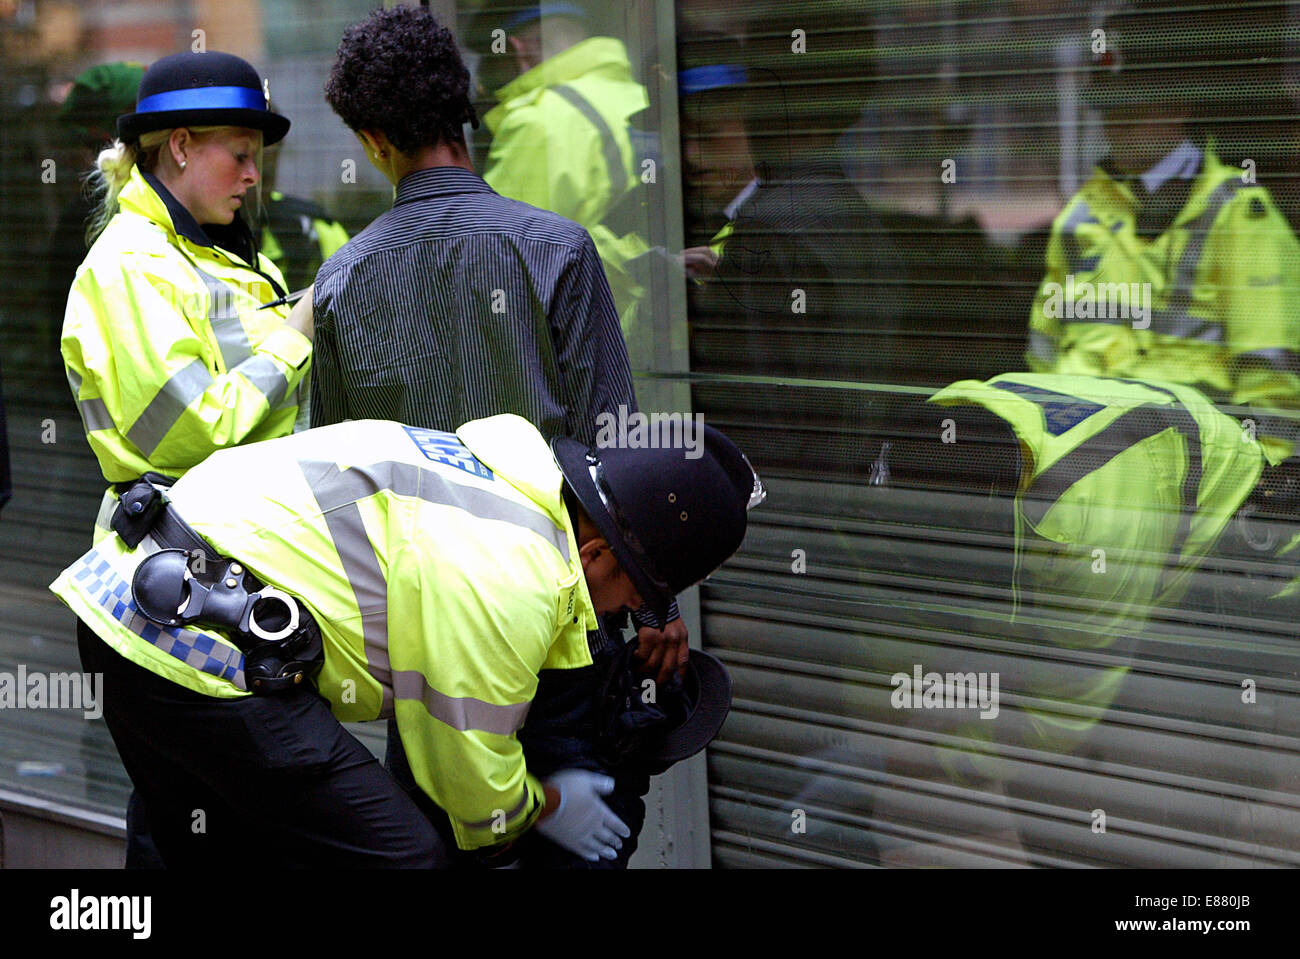 Police carry out drugs searches around the streets of Manchester.  Police search a suspected drug dealer in the northern quarter Stock Photo